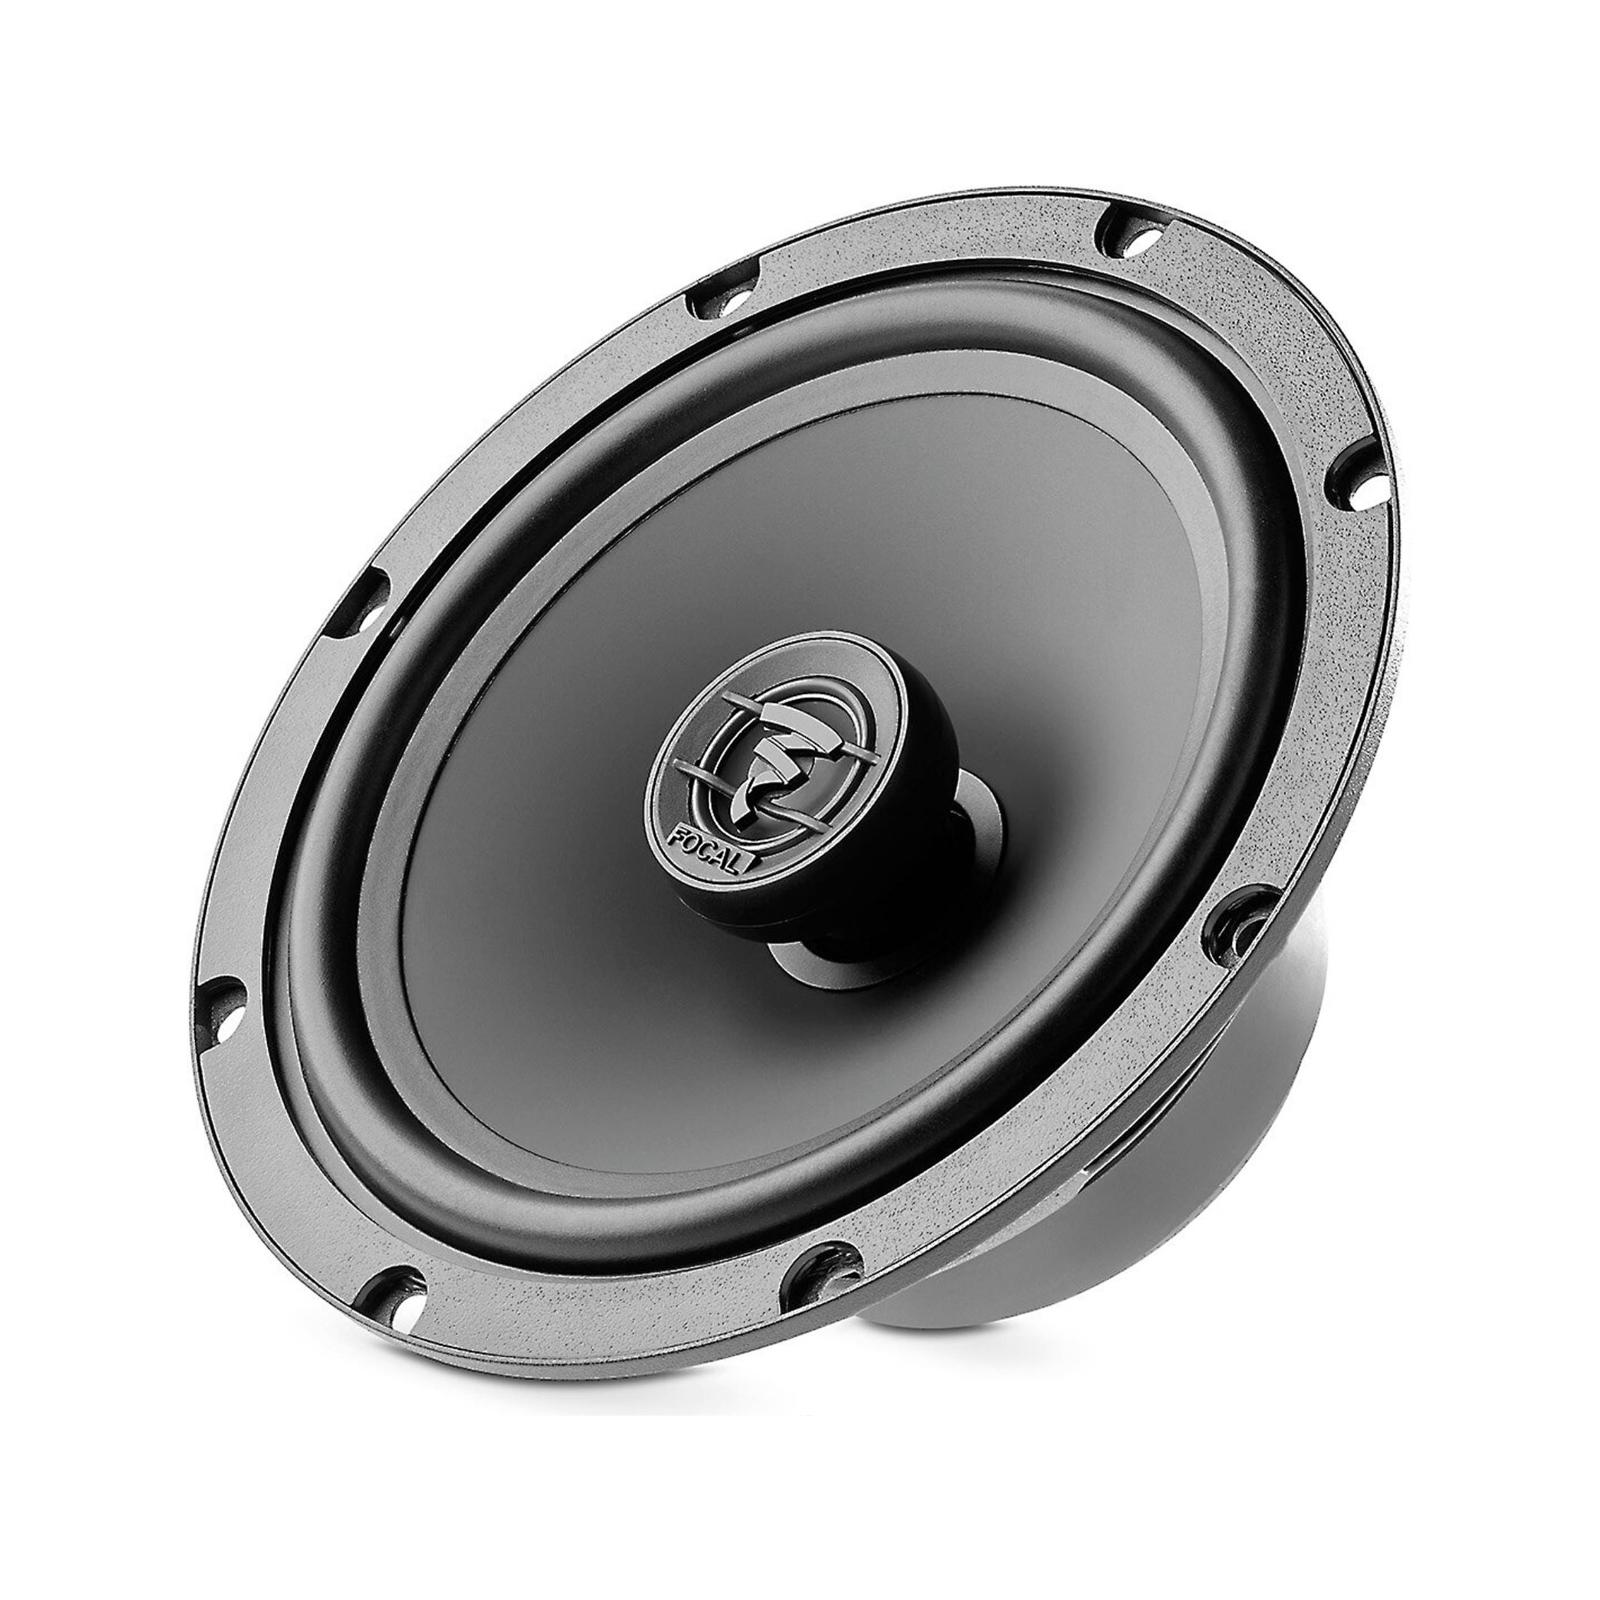 Focal ACX 165 Auditor Series car speakers